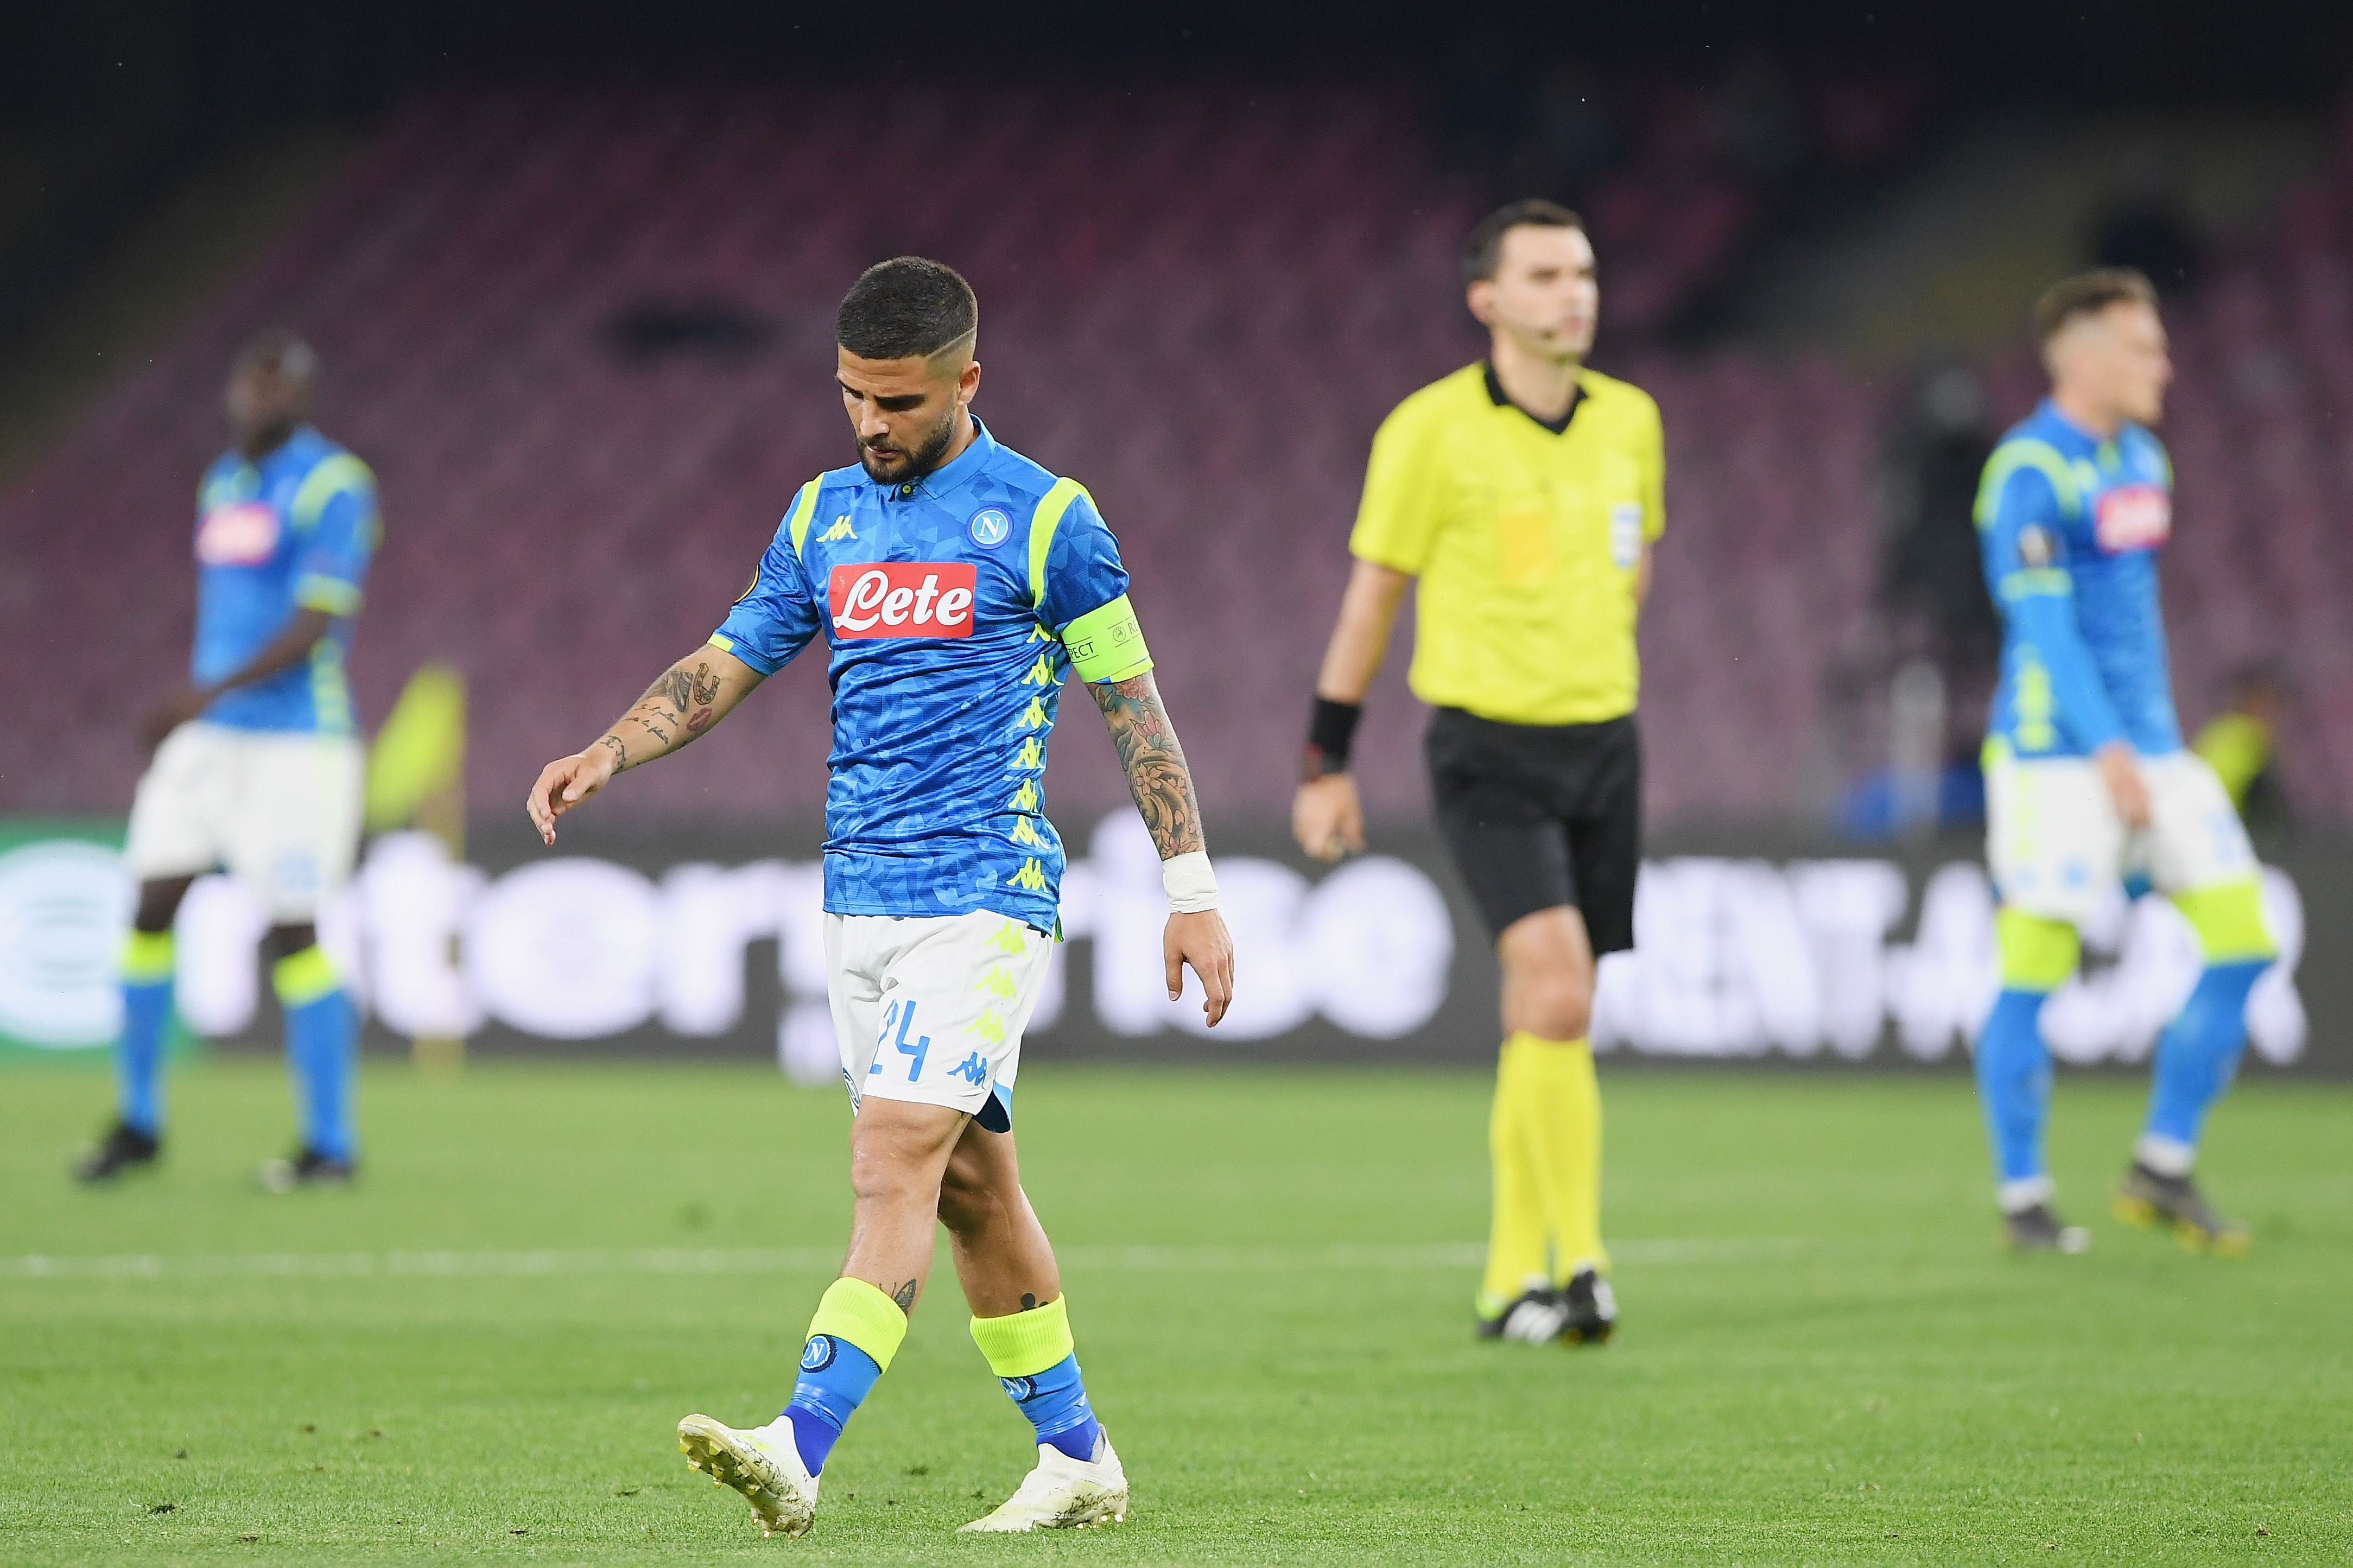 NAPLES, ITALY - APRIL 18: Lorenzo Insigne of SSC Napoli stands disappointed during the UEFA Europa League Quarter Final Second Leg match between S.S.C. Napoli and Arsenal at  Stadio San Paolo on April 18, 2019 in Naples, Italy.  (Photo by Francesco Pecoraro/Getty Images)